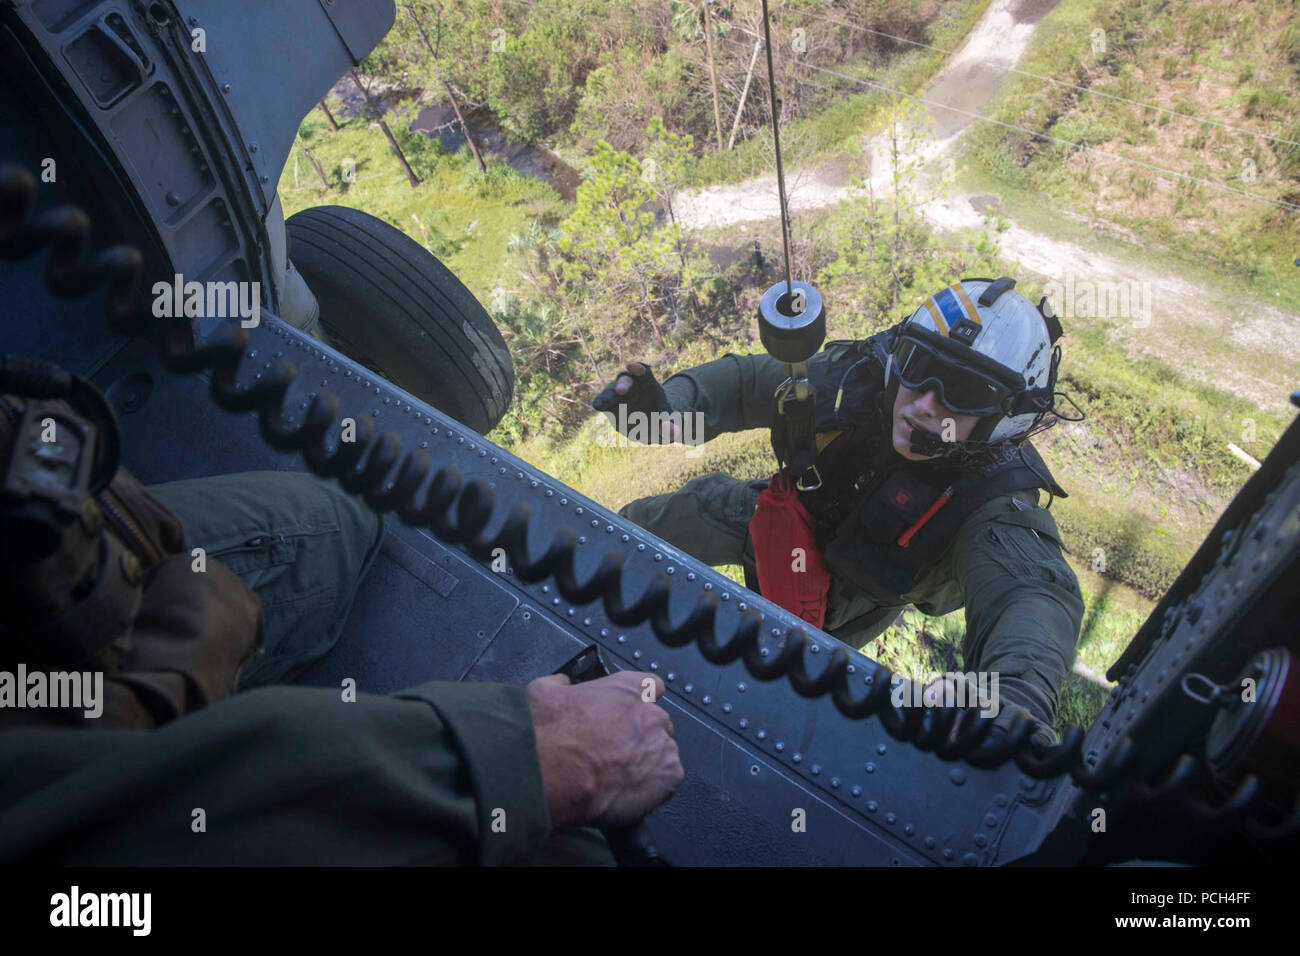 WEST, Fla. (Sept. 12, 2017) Air Crewman (Helicopter) 2nd Class Kurt Weber, from Langing, Kansas, is hoisted into an MH-60R Sea Hawk, from the Spartans of Helicopter Sea Maritime Squadron (HSM) 70, after providing aid to residents affected by Hurricane Irma . The Department of Defense is supporting Federal Emergency Management Agency, the lead federal agency, in helping those affected by Hurricane Irma to minimize suffering and is one component of the overall whole-of-government response effort. Stock Photo